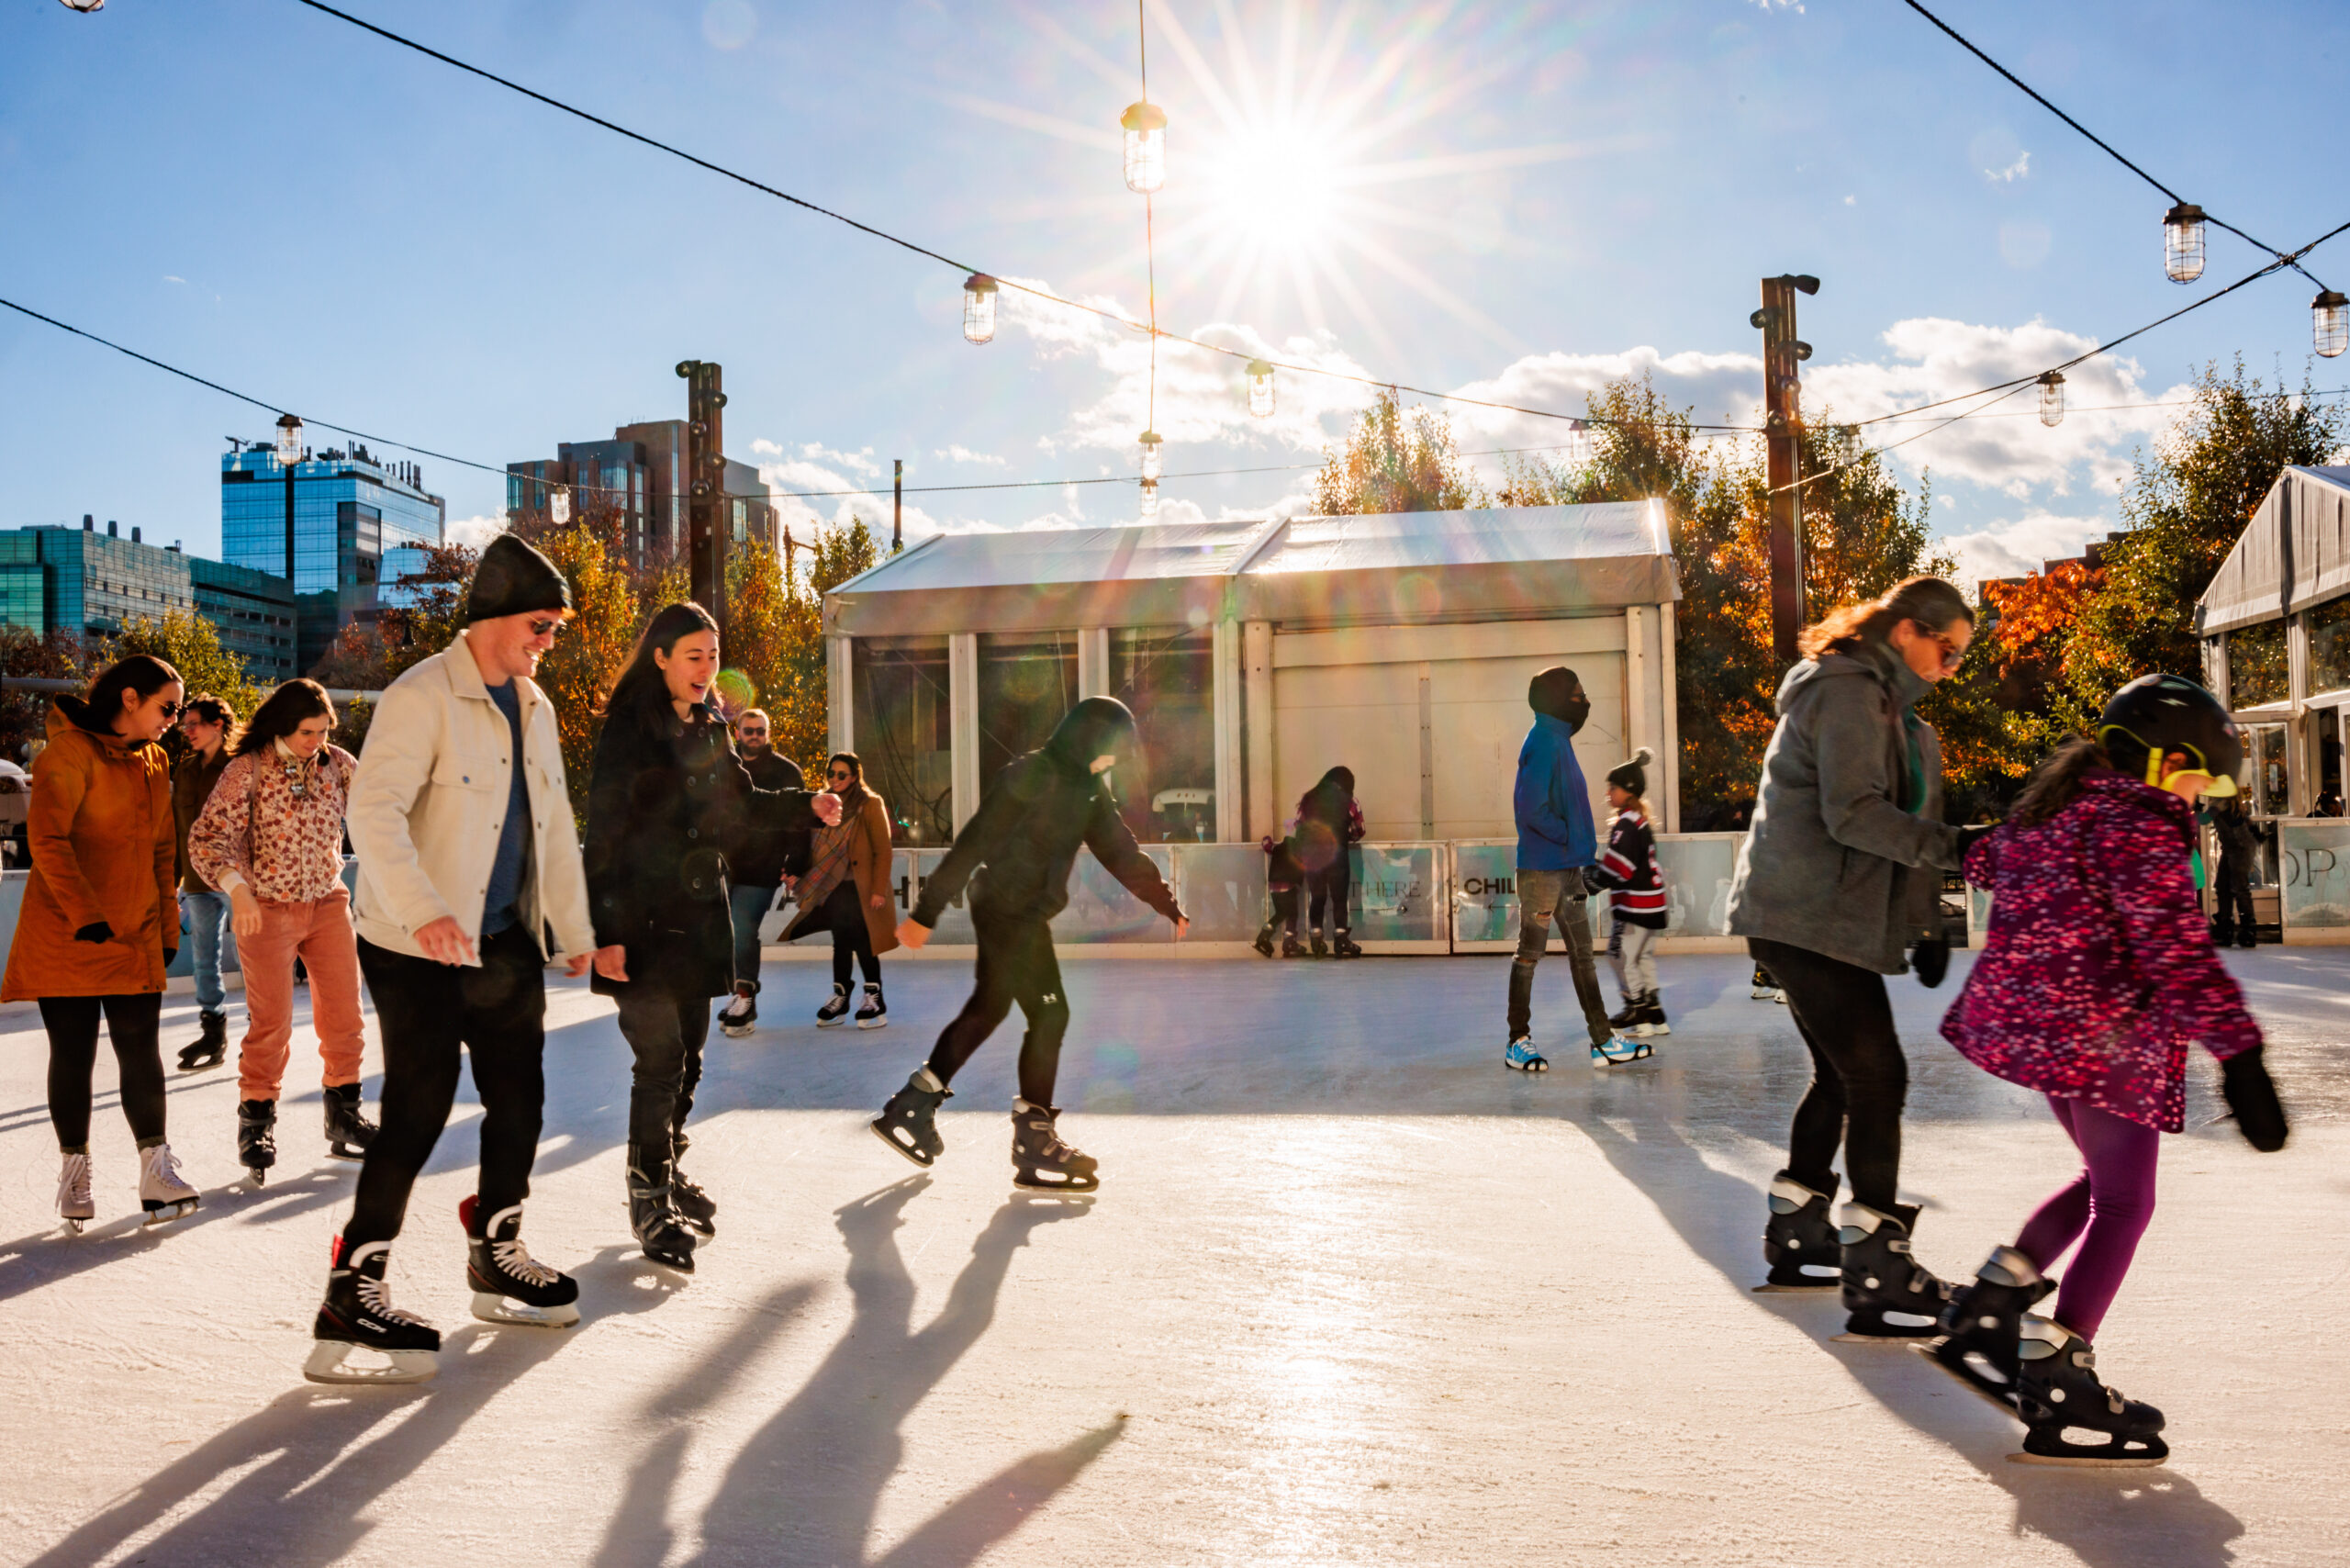 A group of people skating on an ice rink.